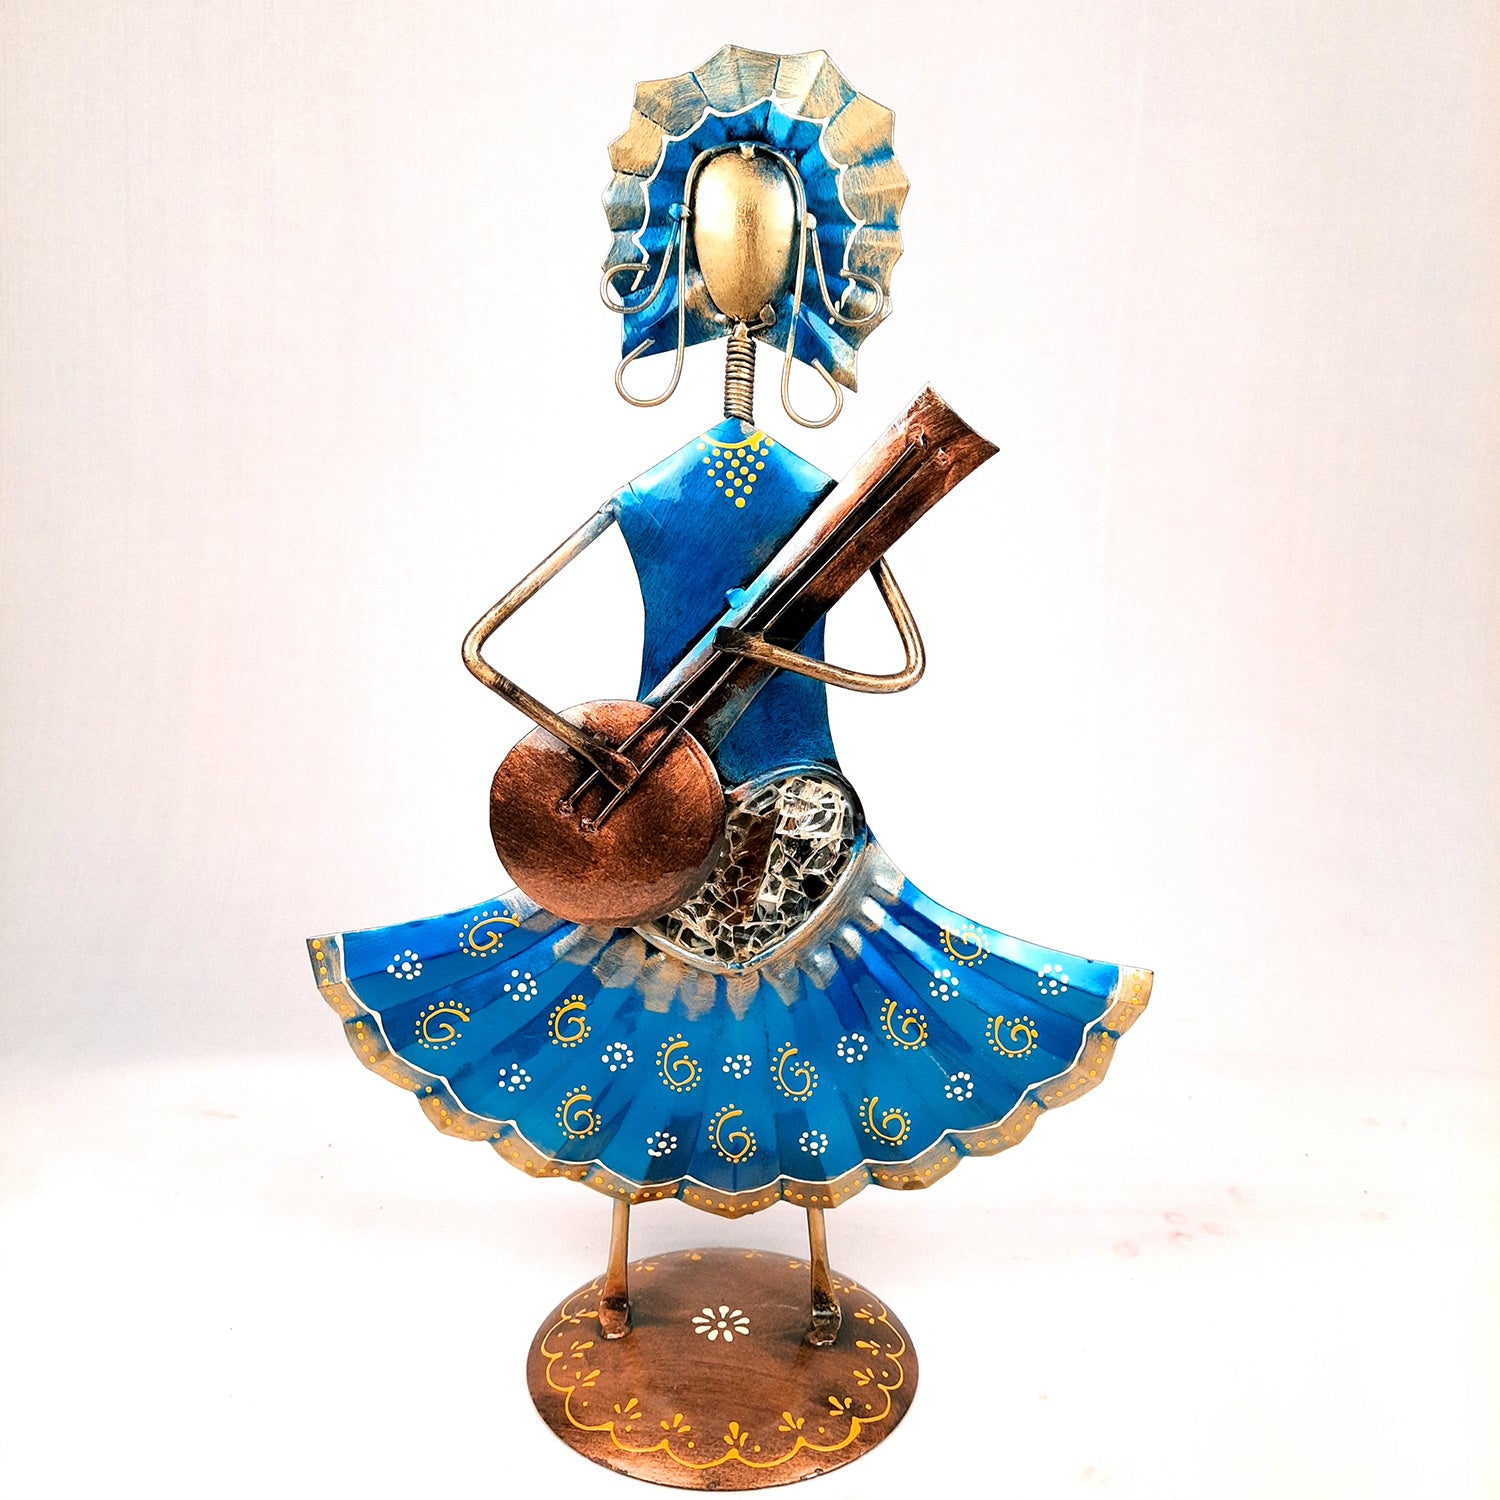 Musician Showpiece - Russian Musicians Playing Musical Instruments | Decorative Figurines - For Home, Table, Living Room, TV Unit, Bedroom Decor | Handicraft Gifts -14 Inch (Set of 3) - Apkamart